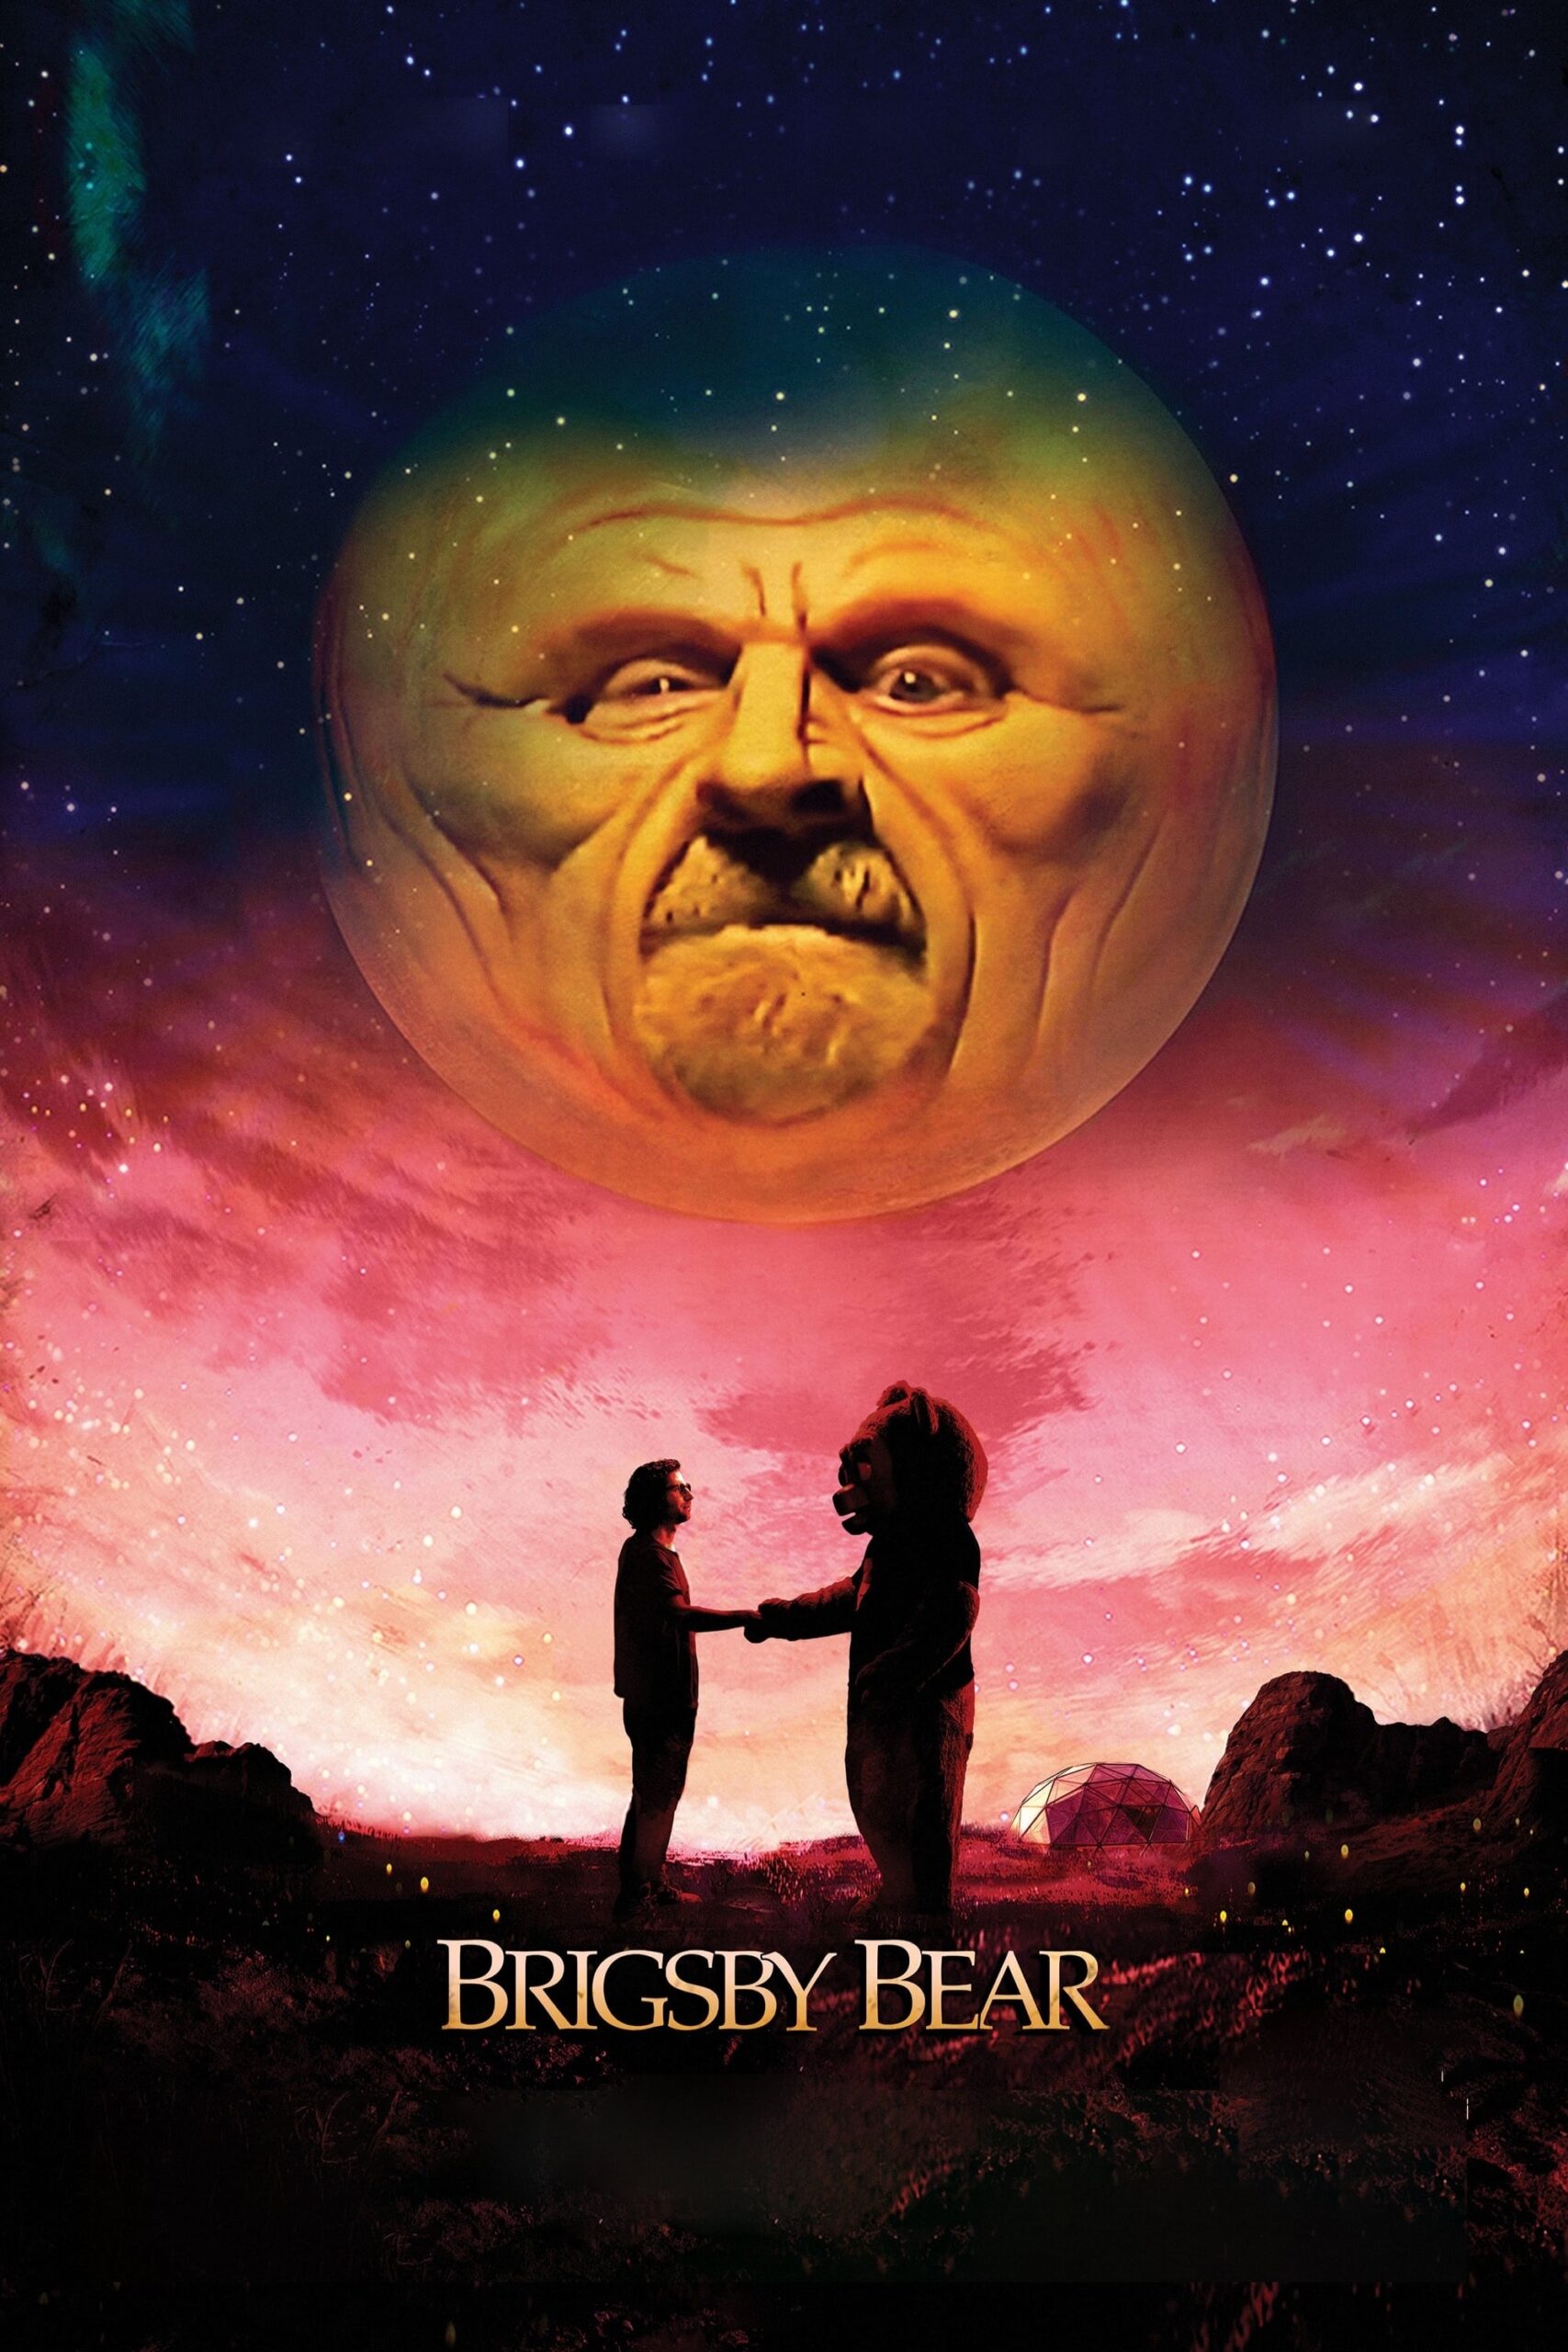 Poster for the movie "Brigsby Bear"